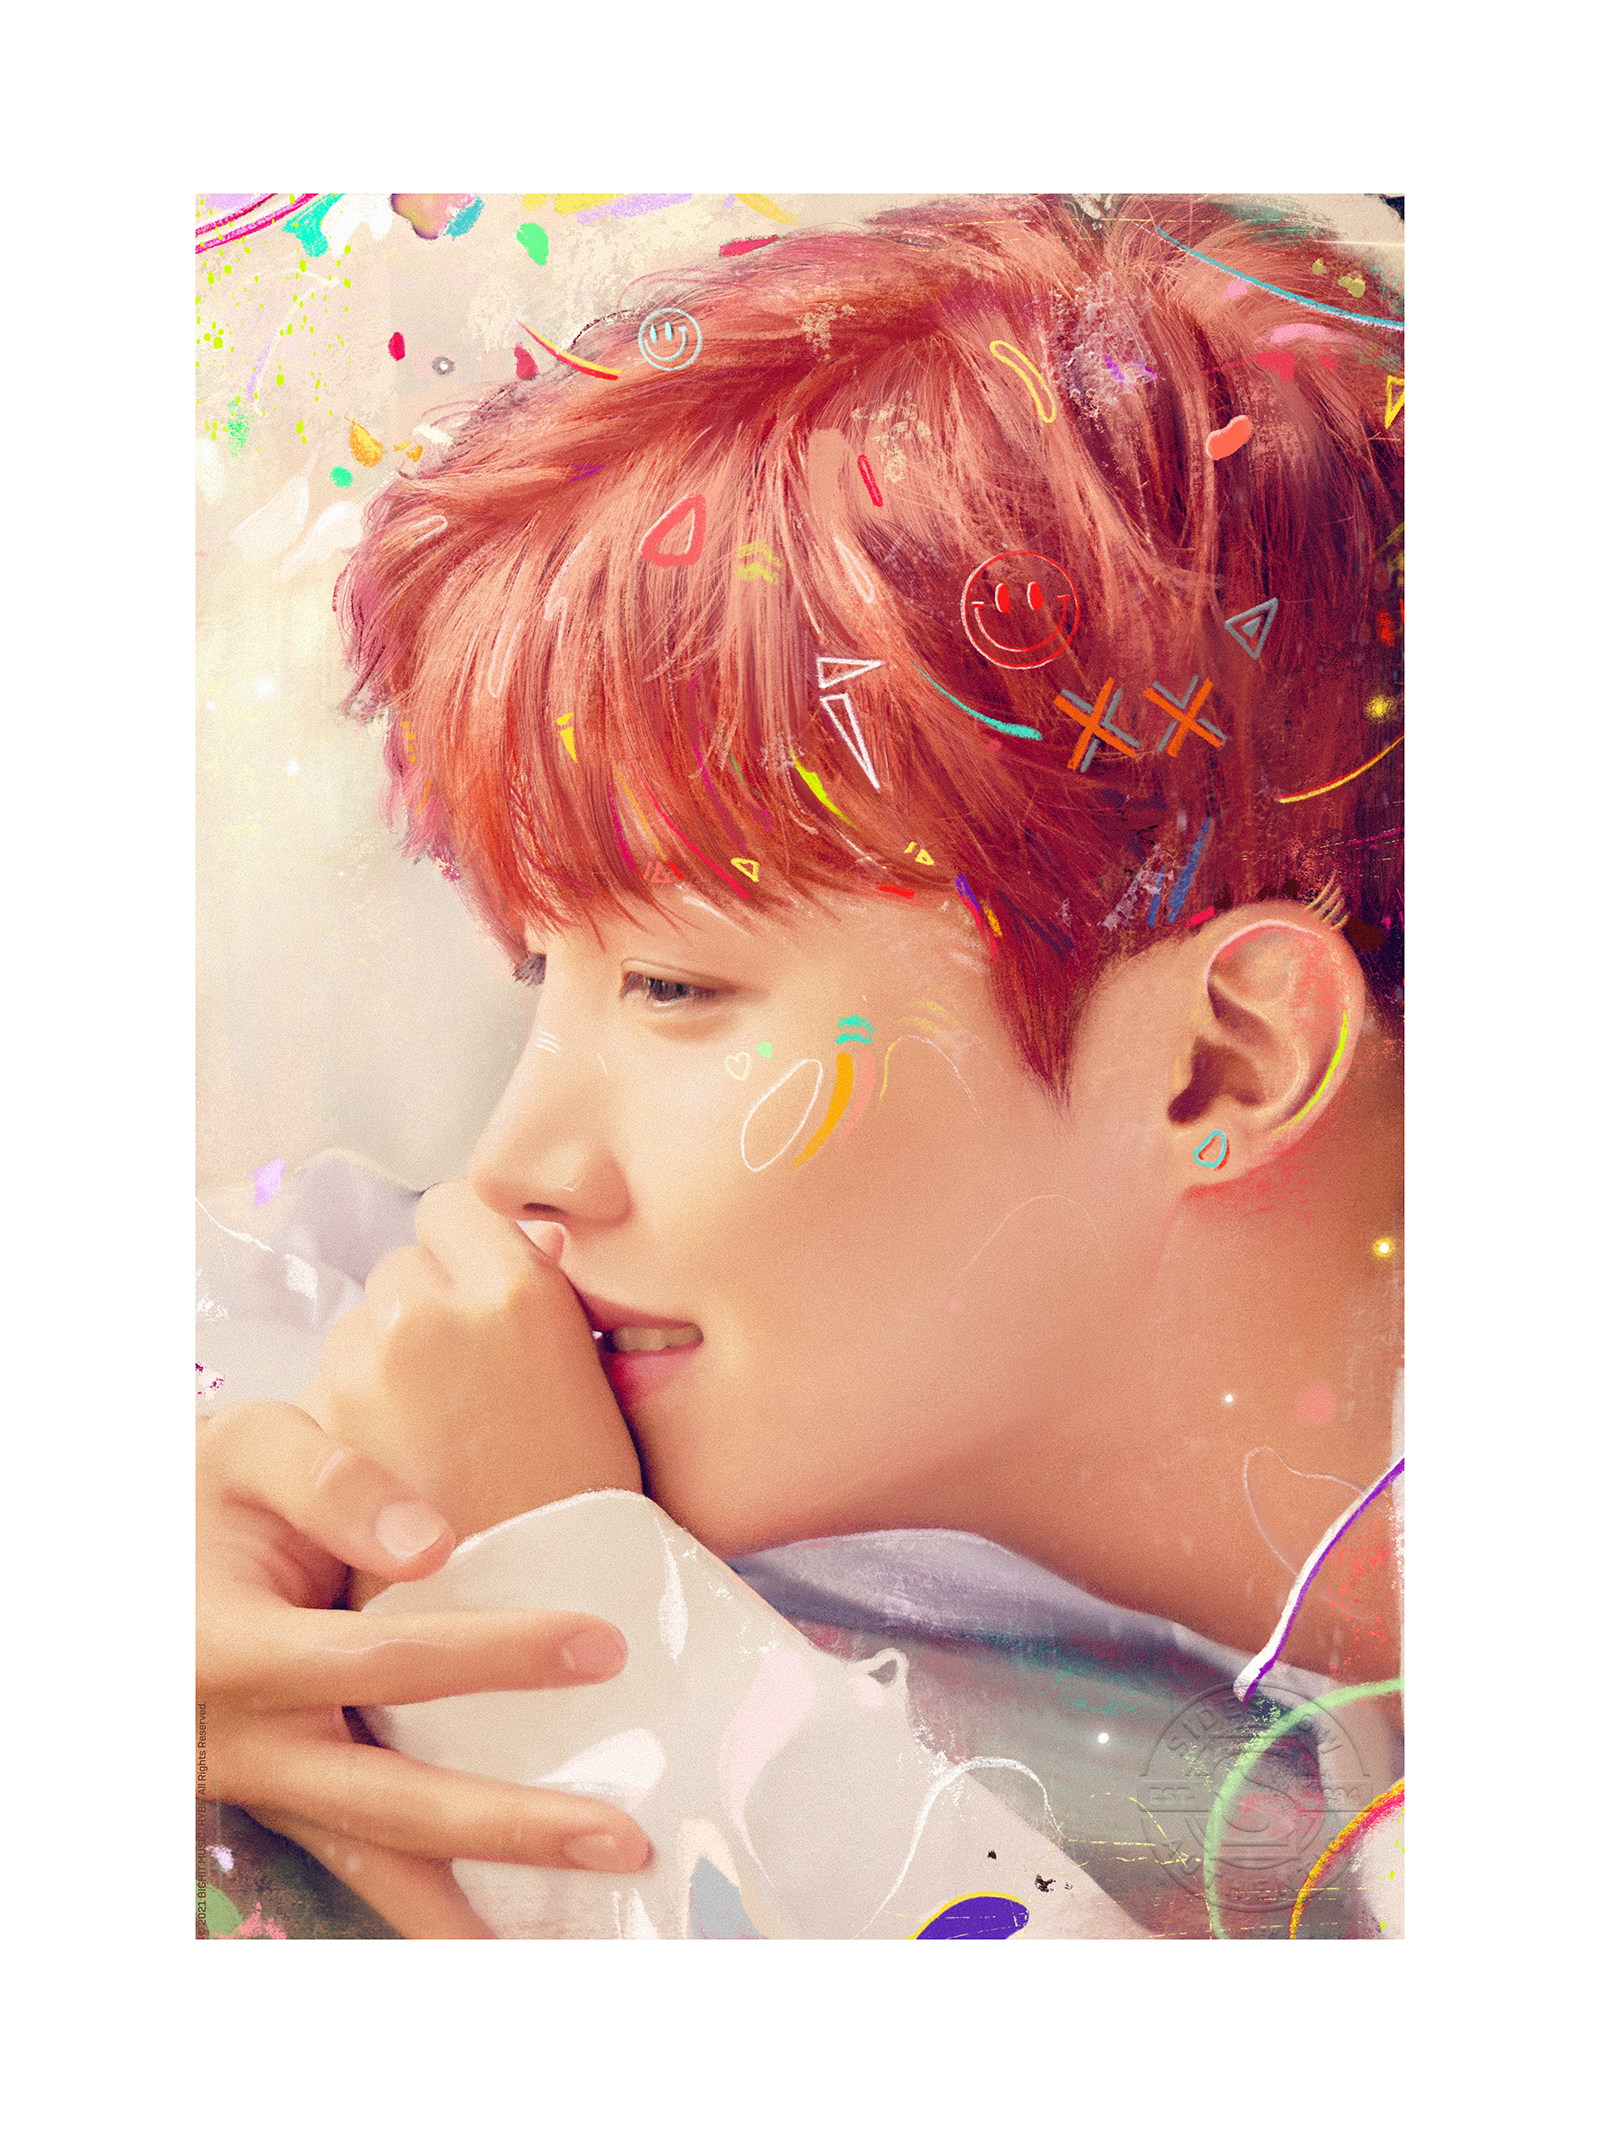 Love Yourself: j-hope Exclusive Edition 